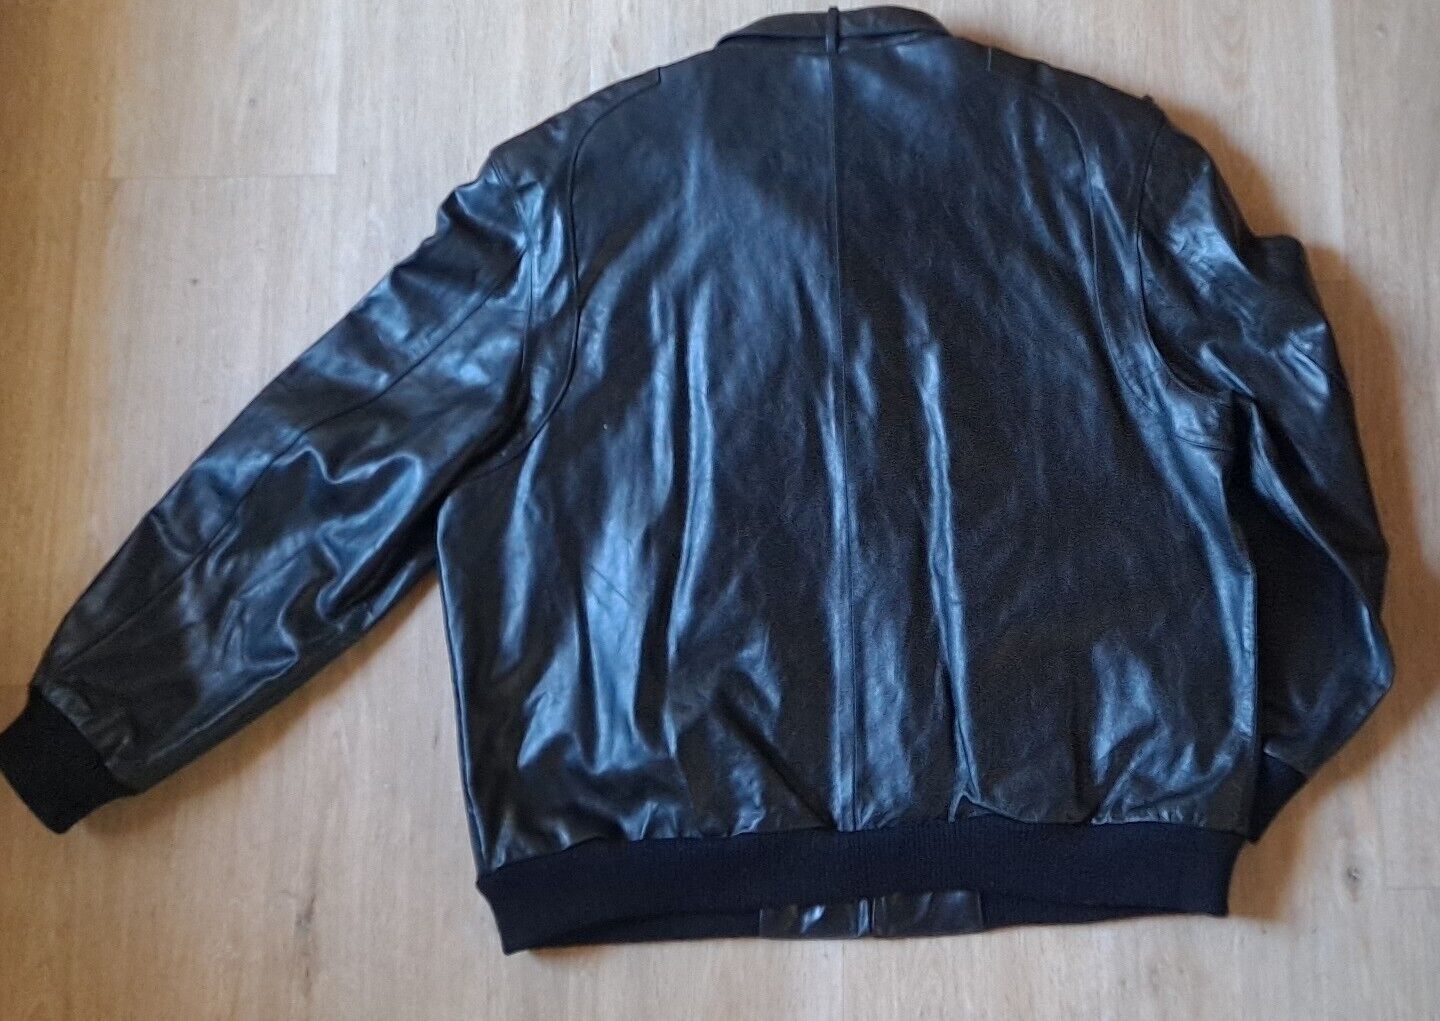 Vintage Members Only Leather Jacket Men’s XXLT 2x… - image 5